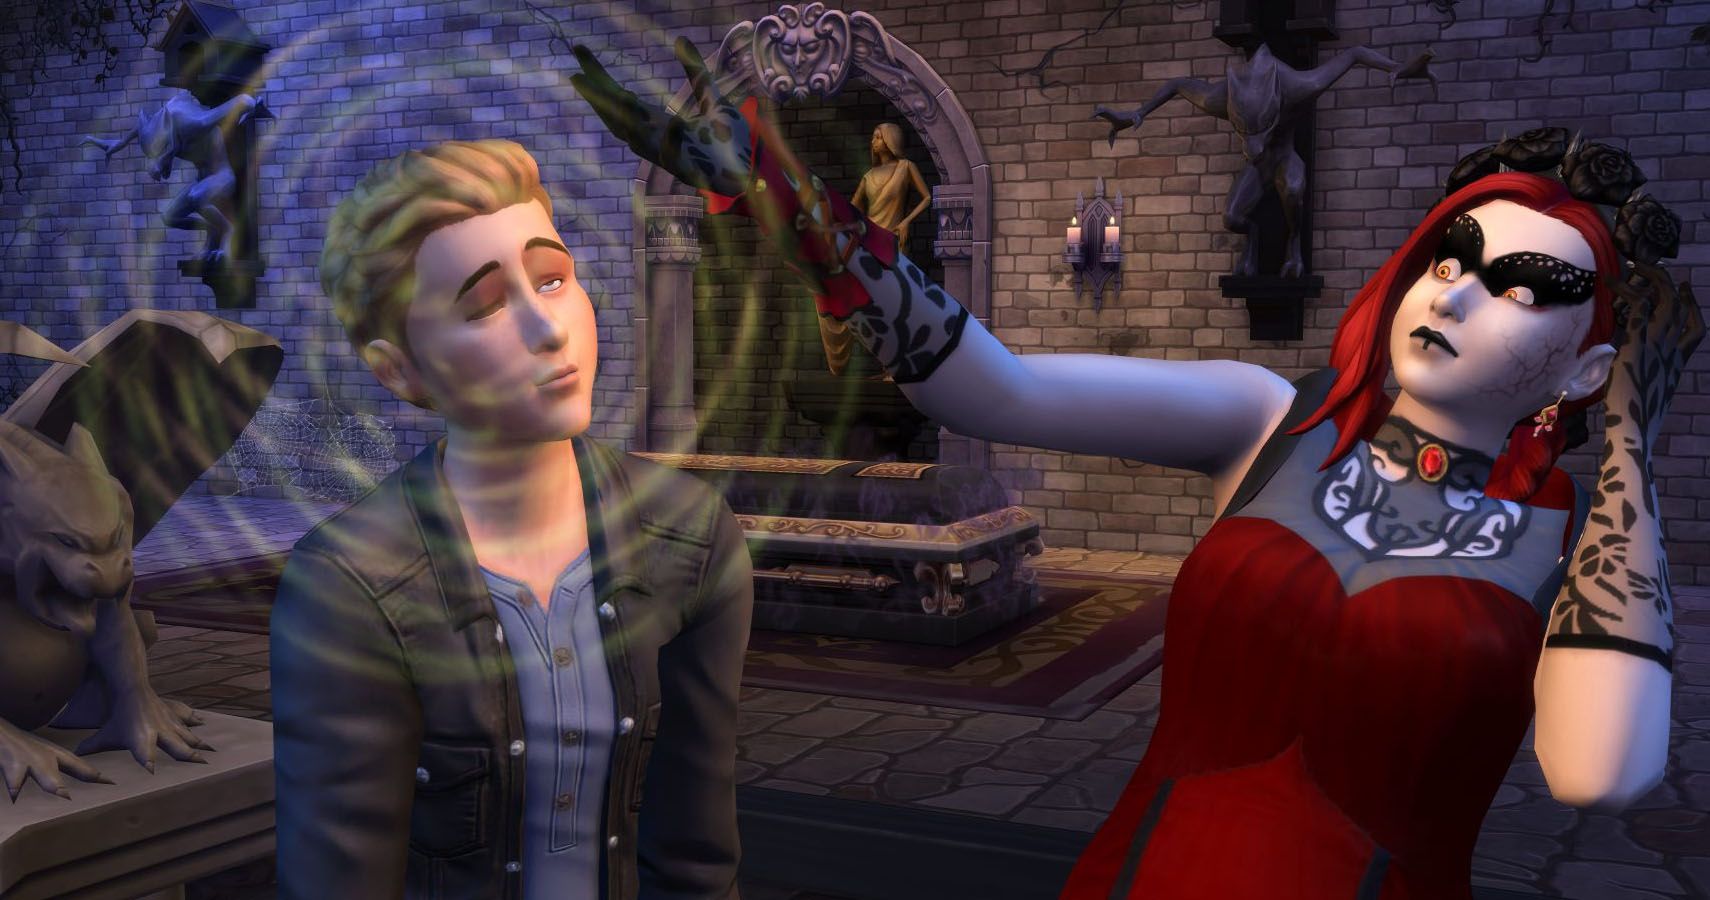 A vampire using mind control powers on a sim.